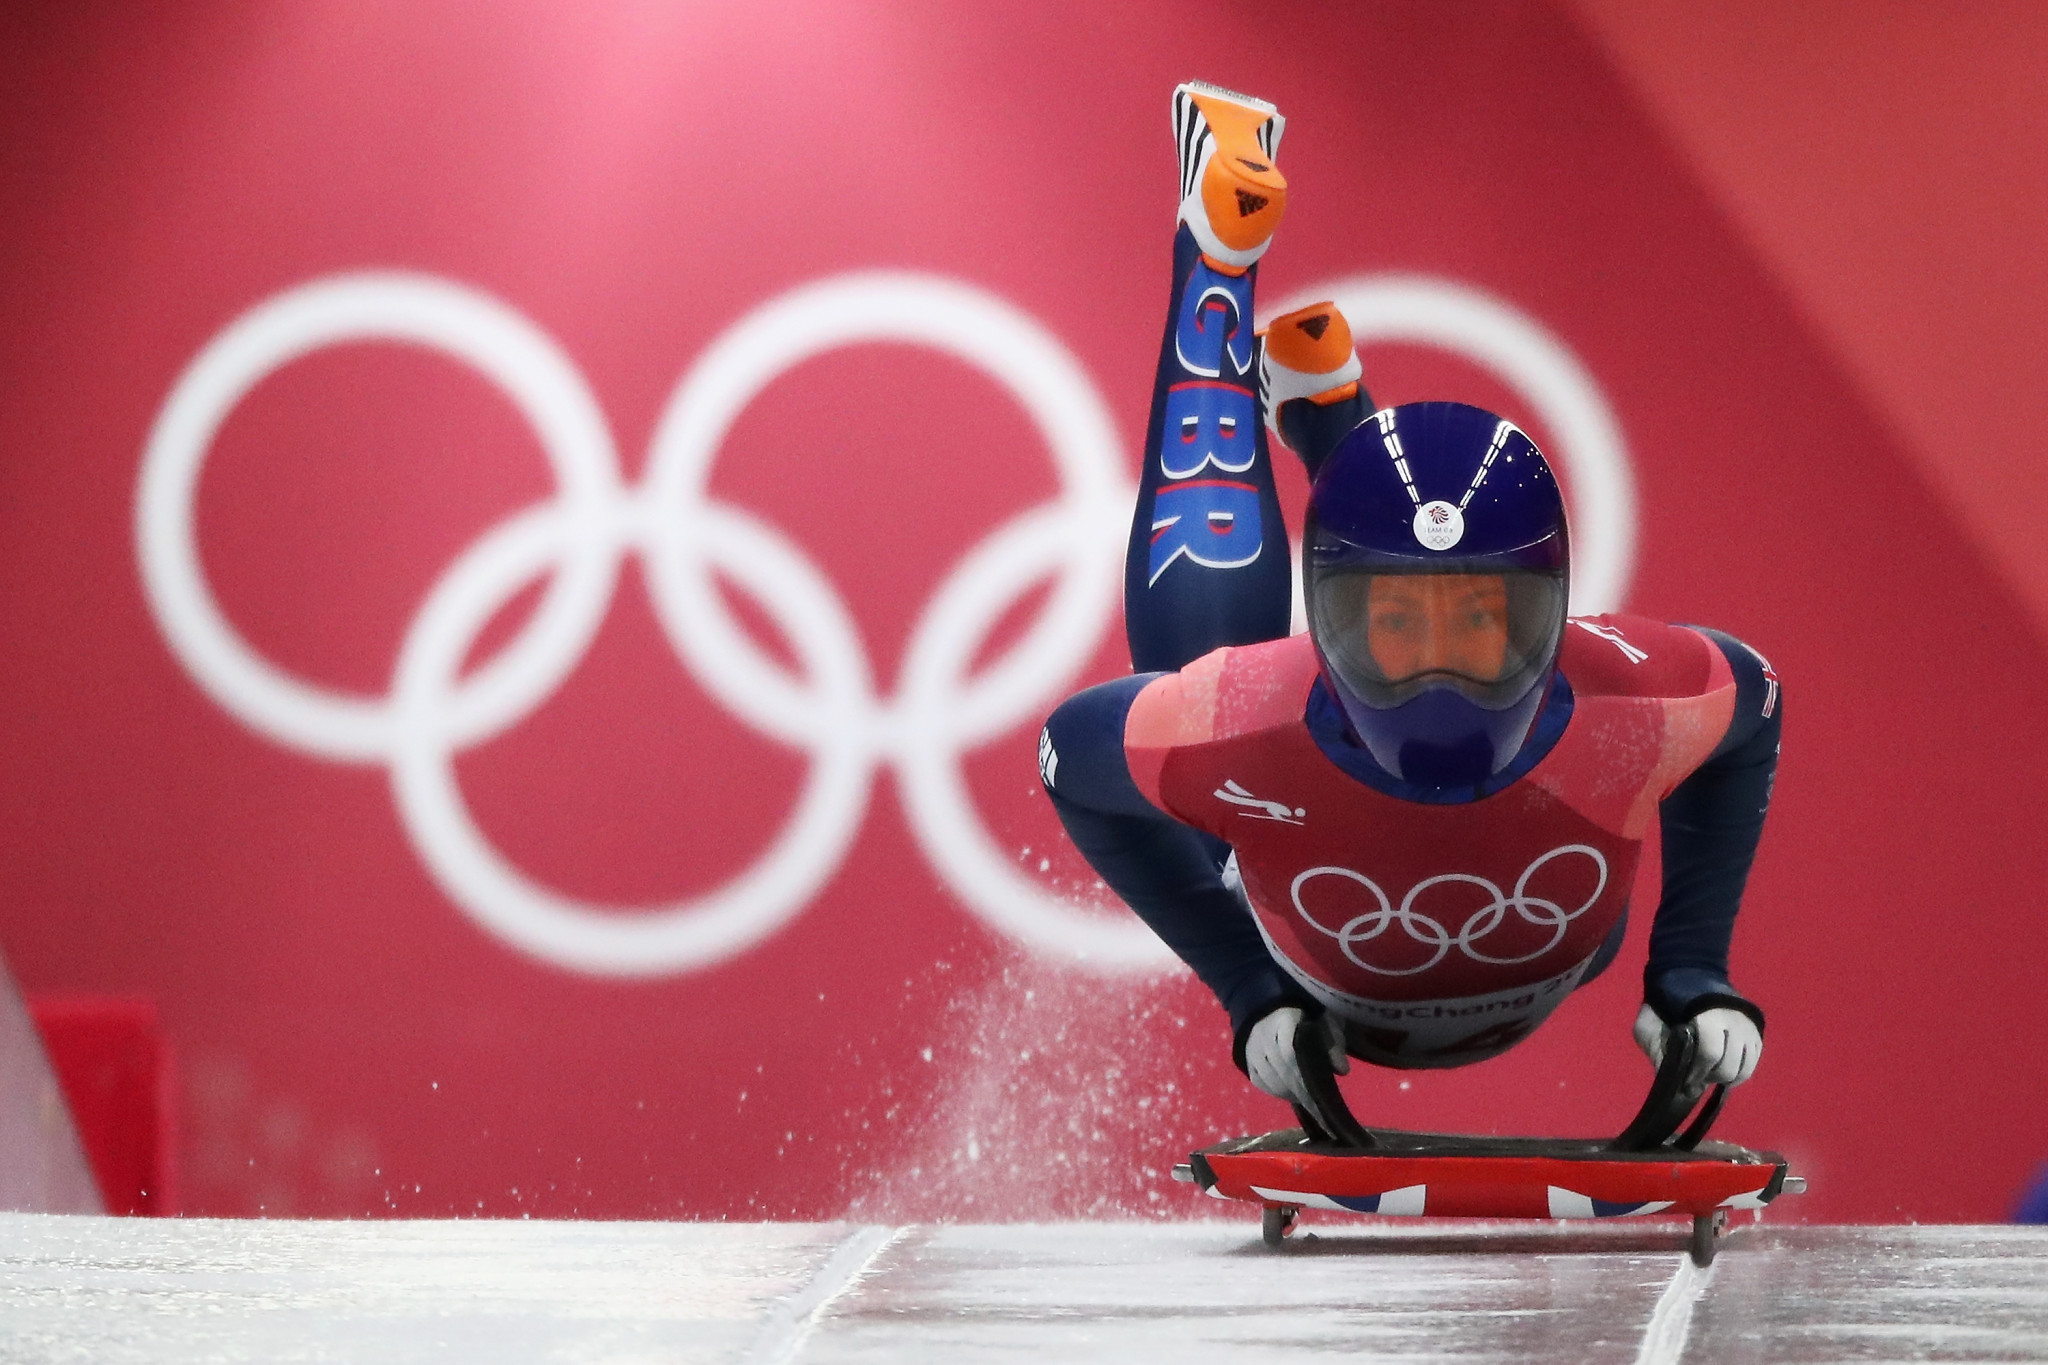 Lizzy Yarnold won Britain's only Olympic gold medals at both Sochi 2014 and Pyeongchang 2018 but will not be at Beijing 2022 after retiring ©Getty Images 